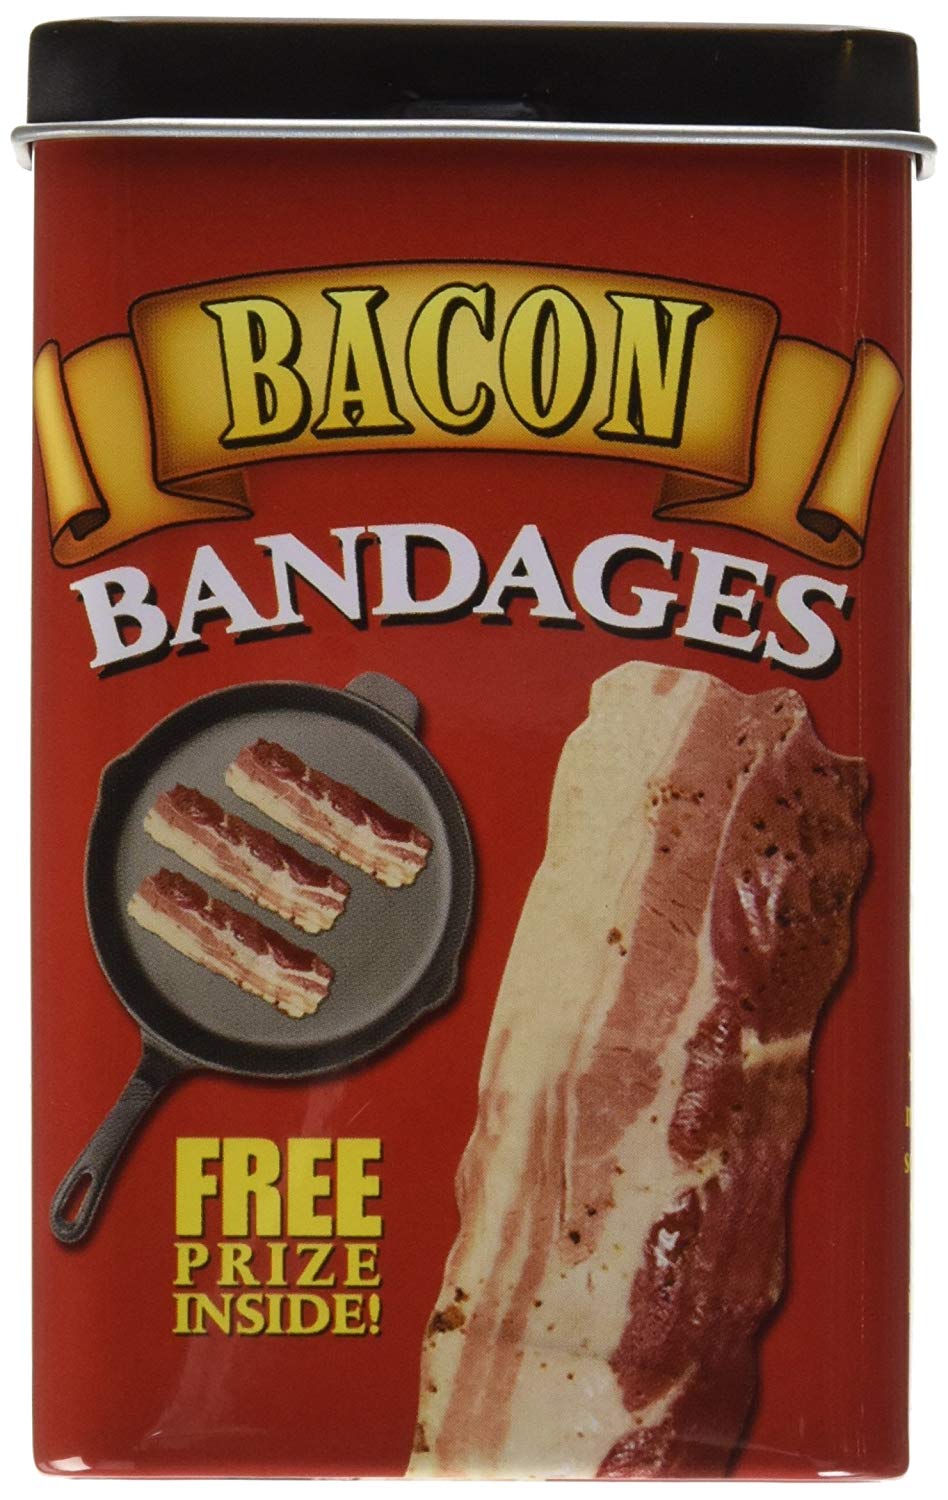 Accoutrements Bacon Strips Bandages - Bacon Bandages Free Prize Inside!